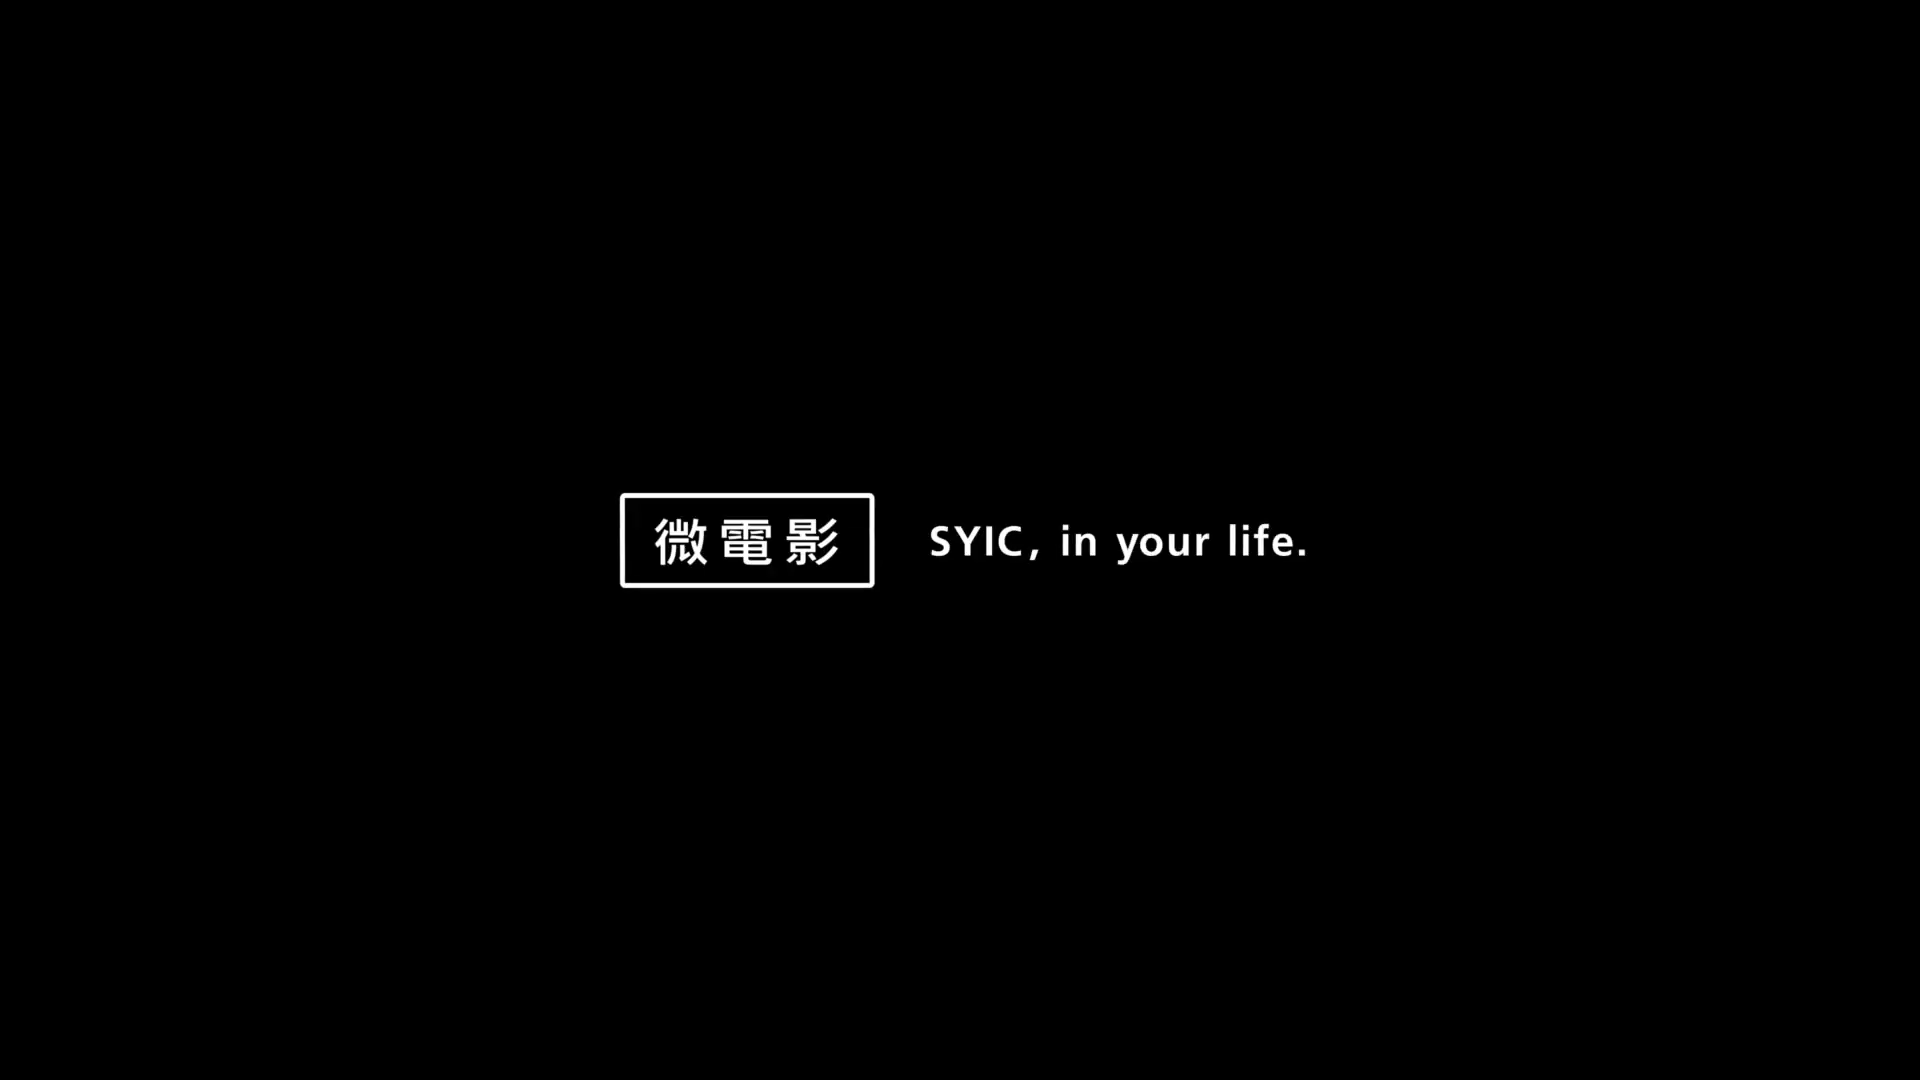 SYIC, in your life (微電影)